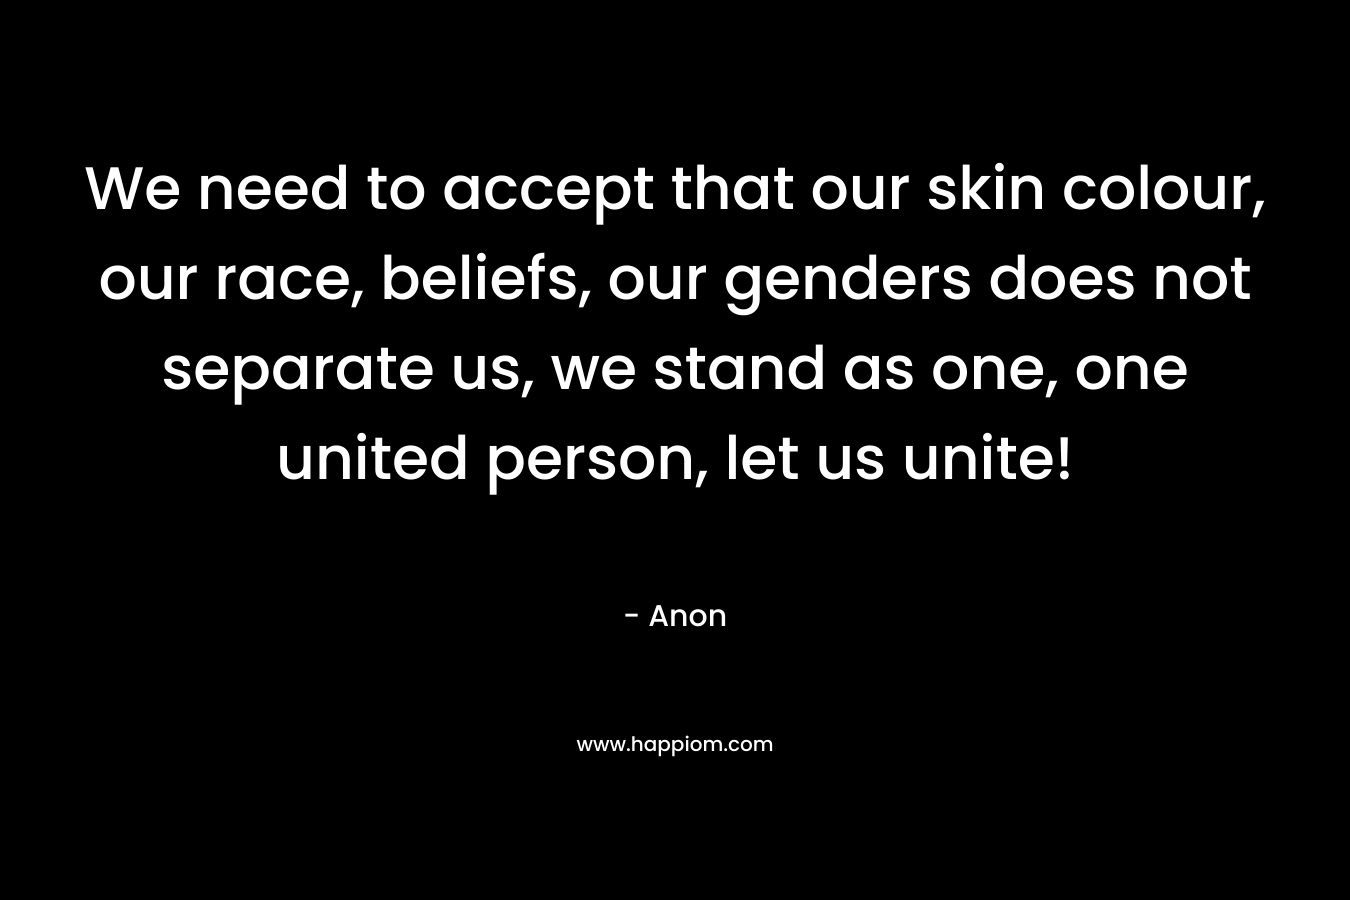 We need to accept that our skin colour, our race, beliefs, our genders does not separate us, we stand as one, one united person, let us unite!